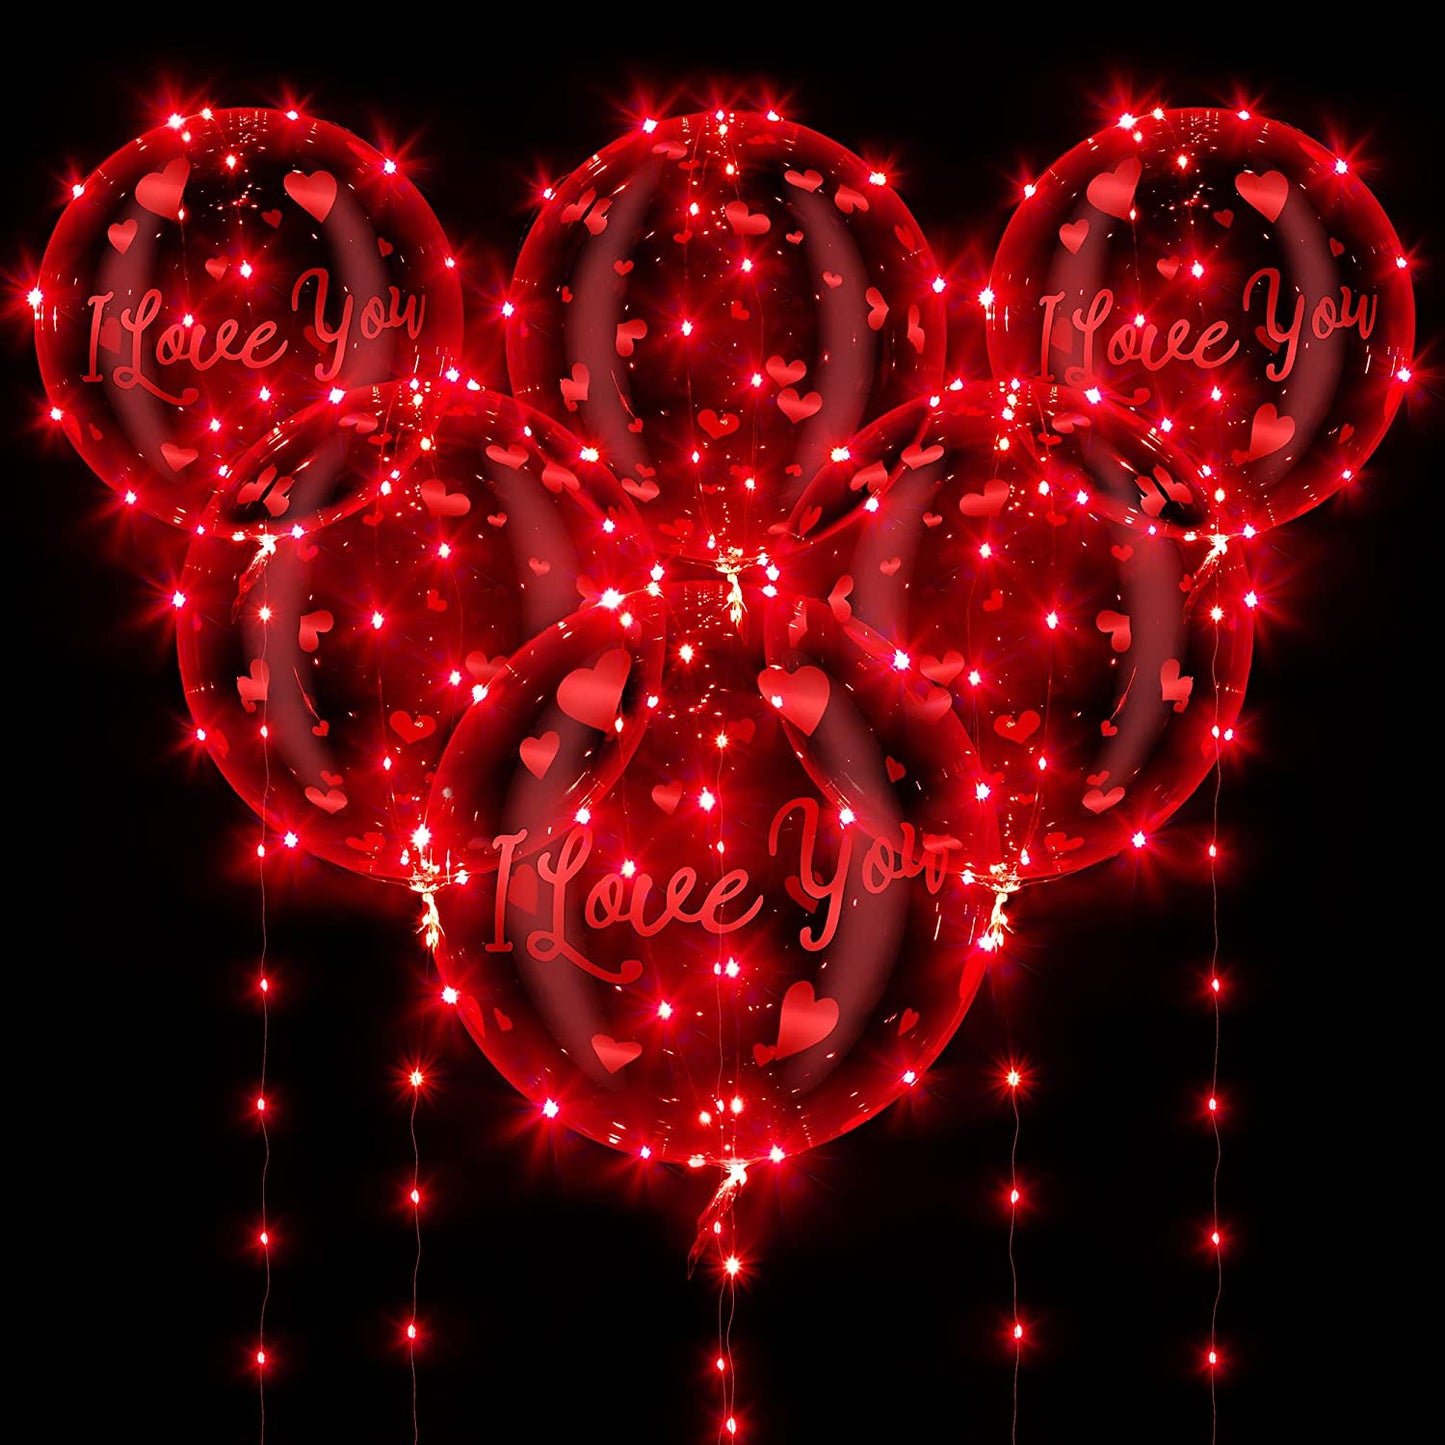 x 6- 20 inch Red Light Up Balloons with I Love you